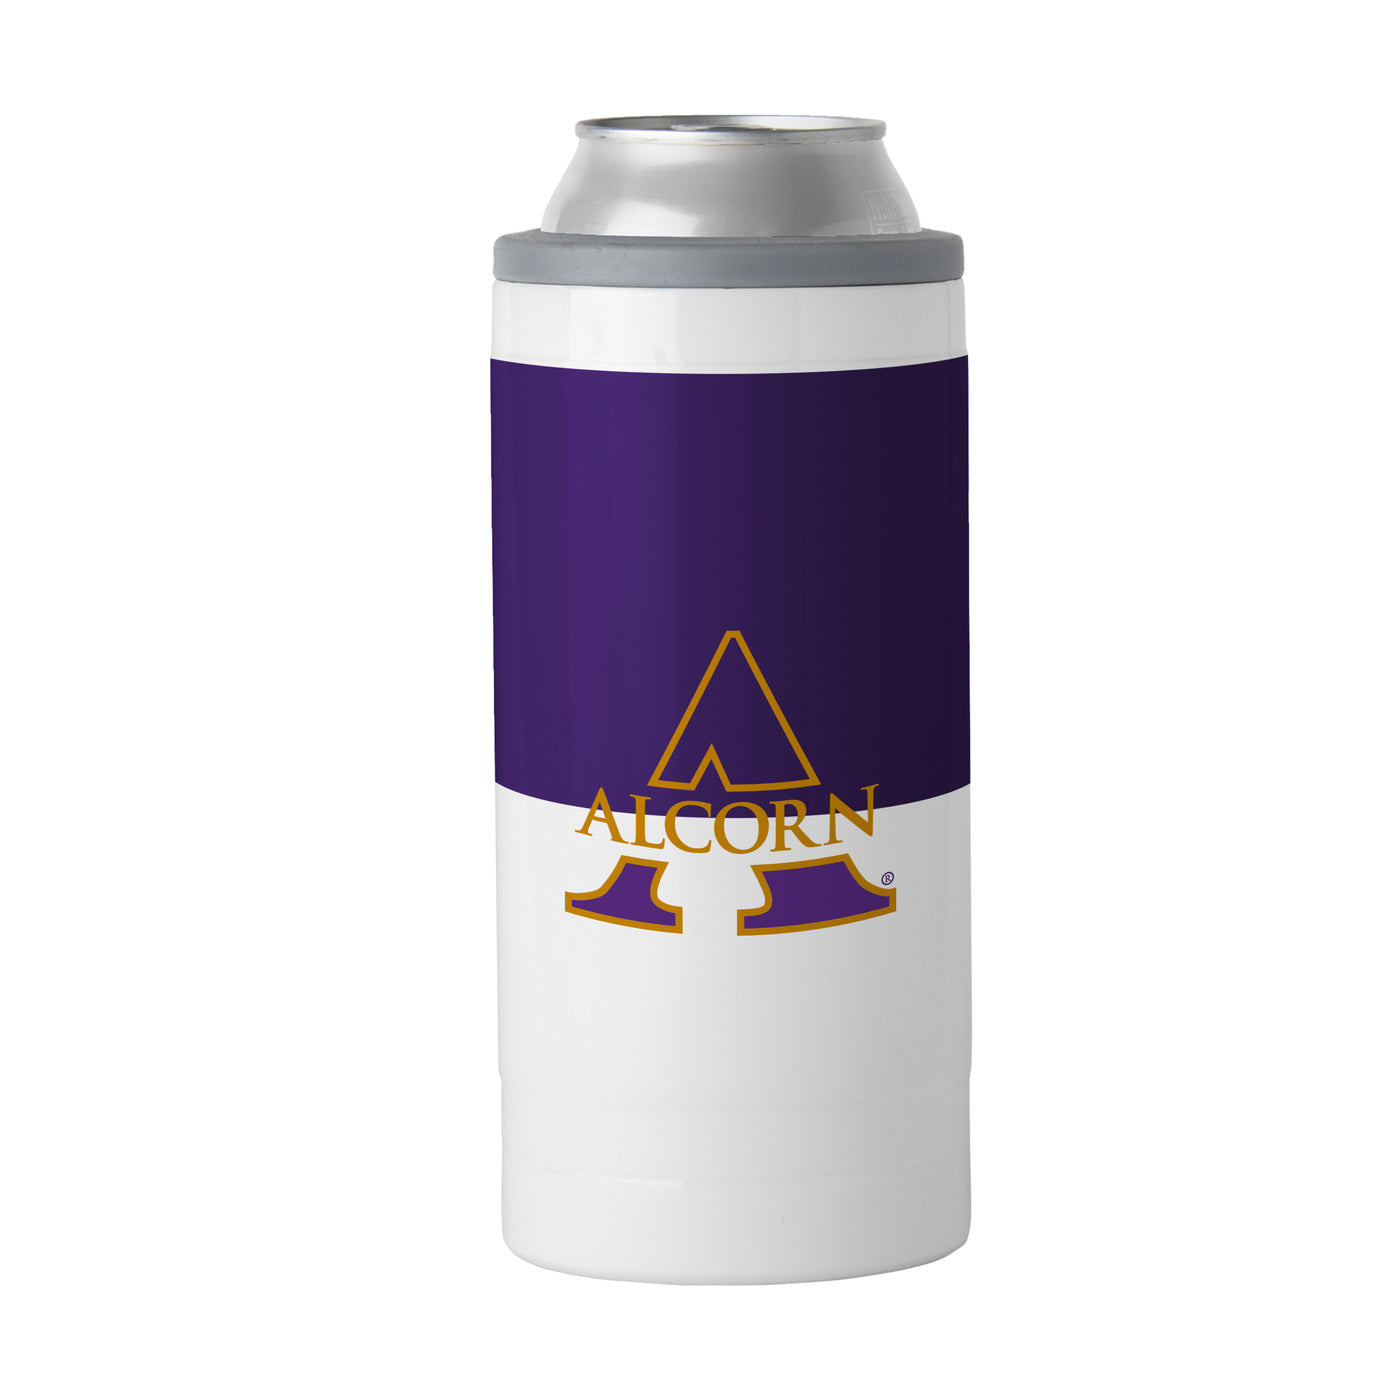 Alcorn State 12oz Colorblock Slim Can Coolie